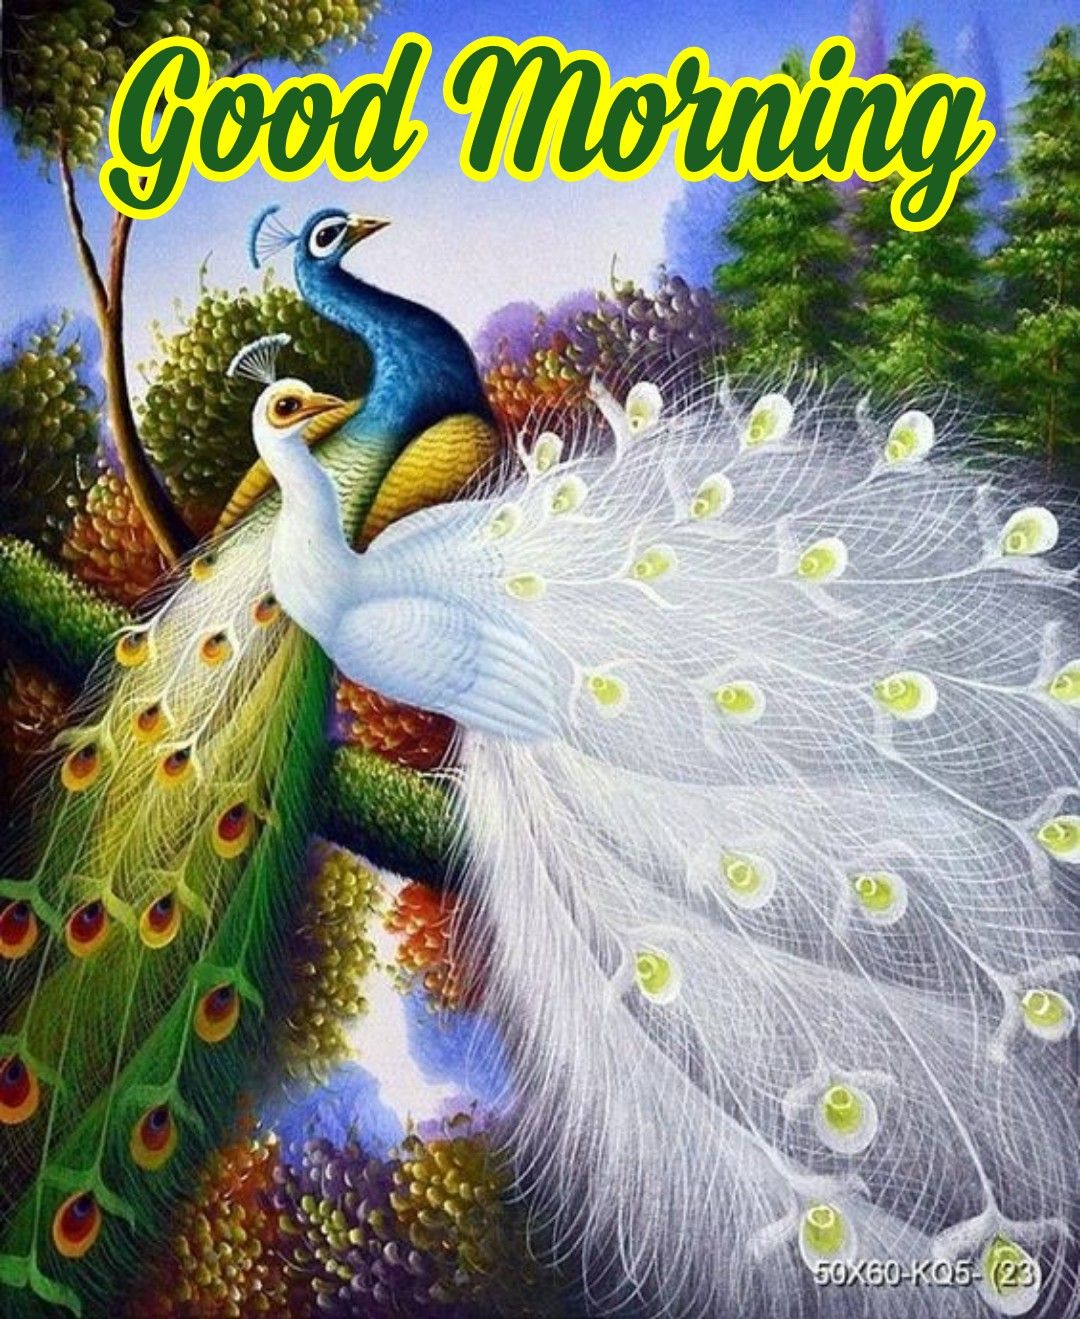 Good Morning Peacock Images WIth Quotes